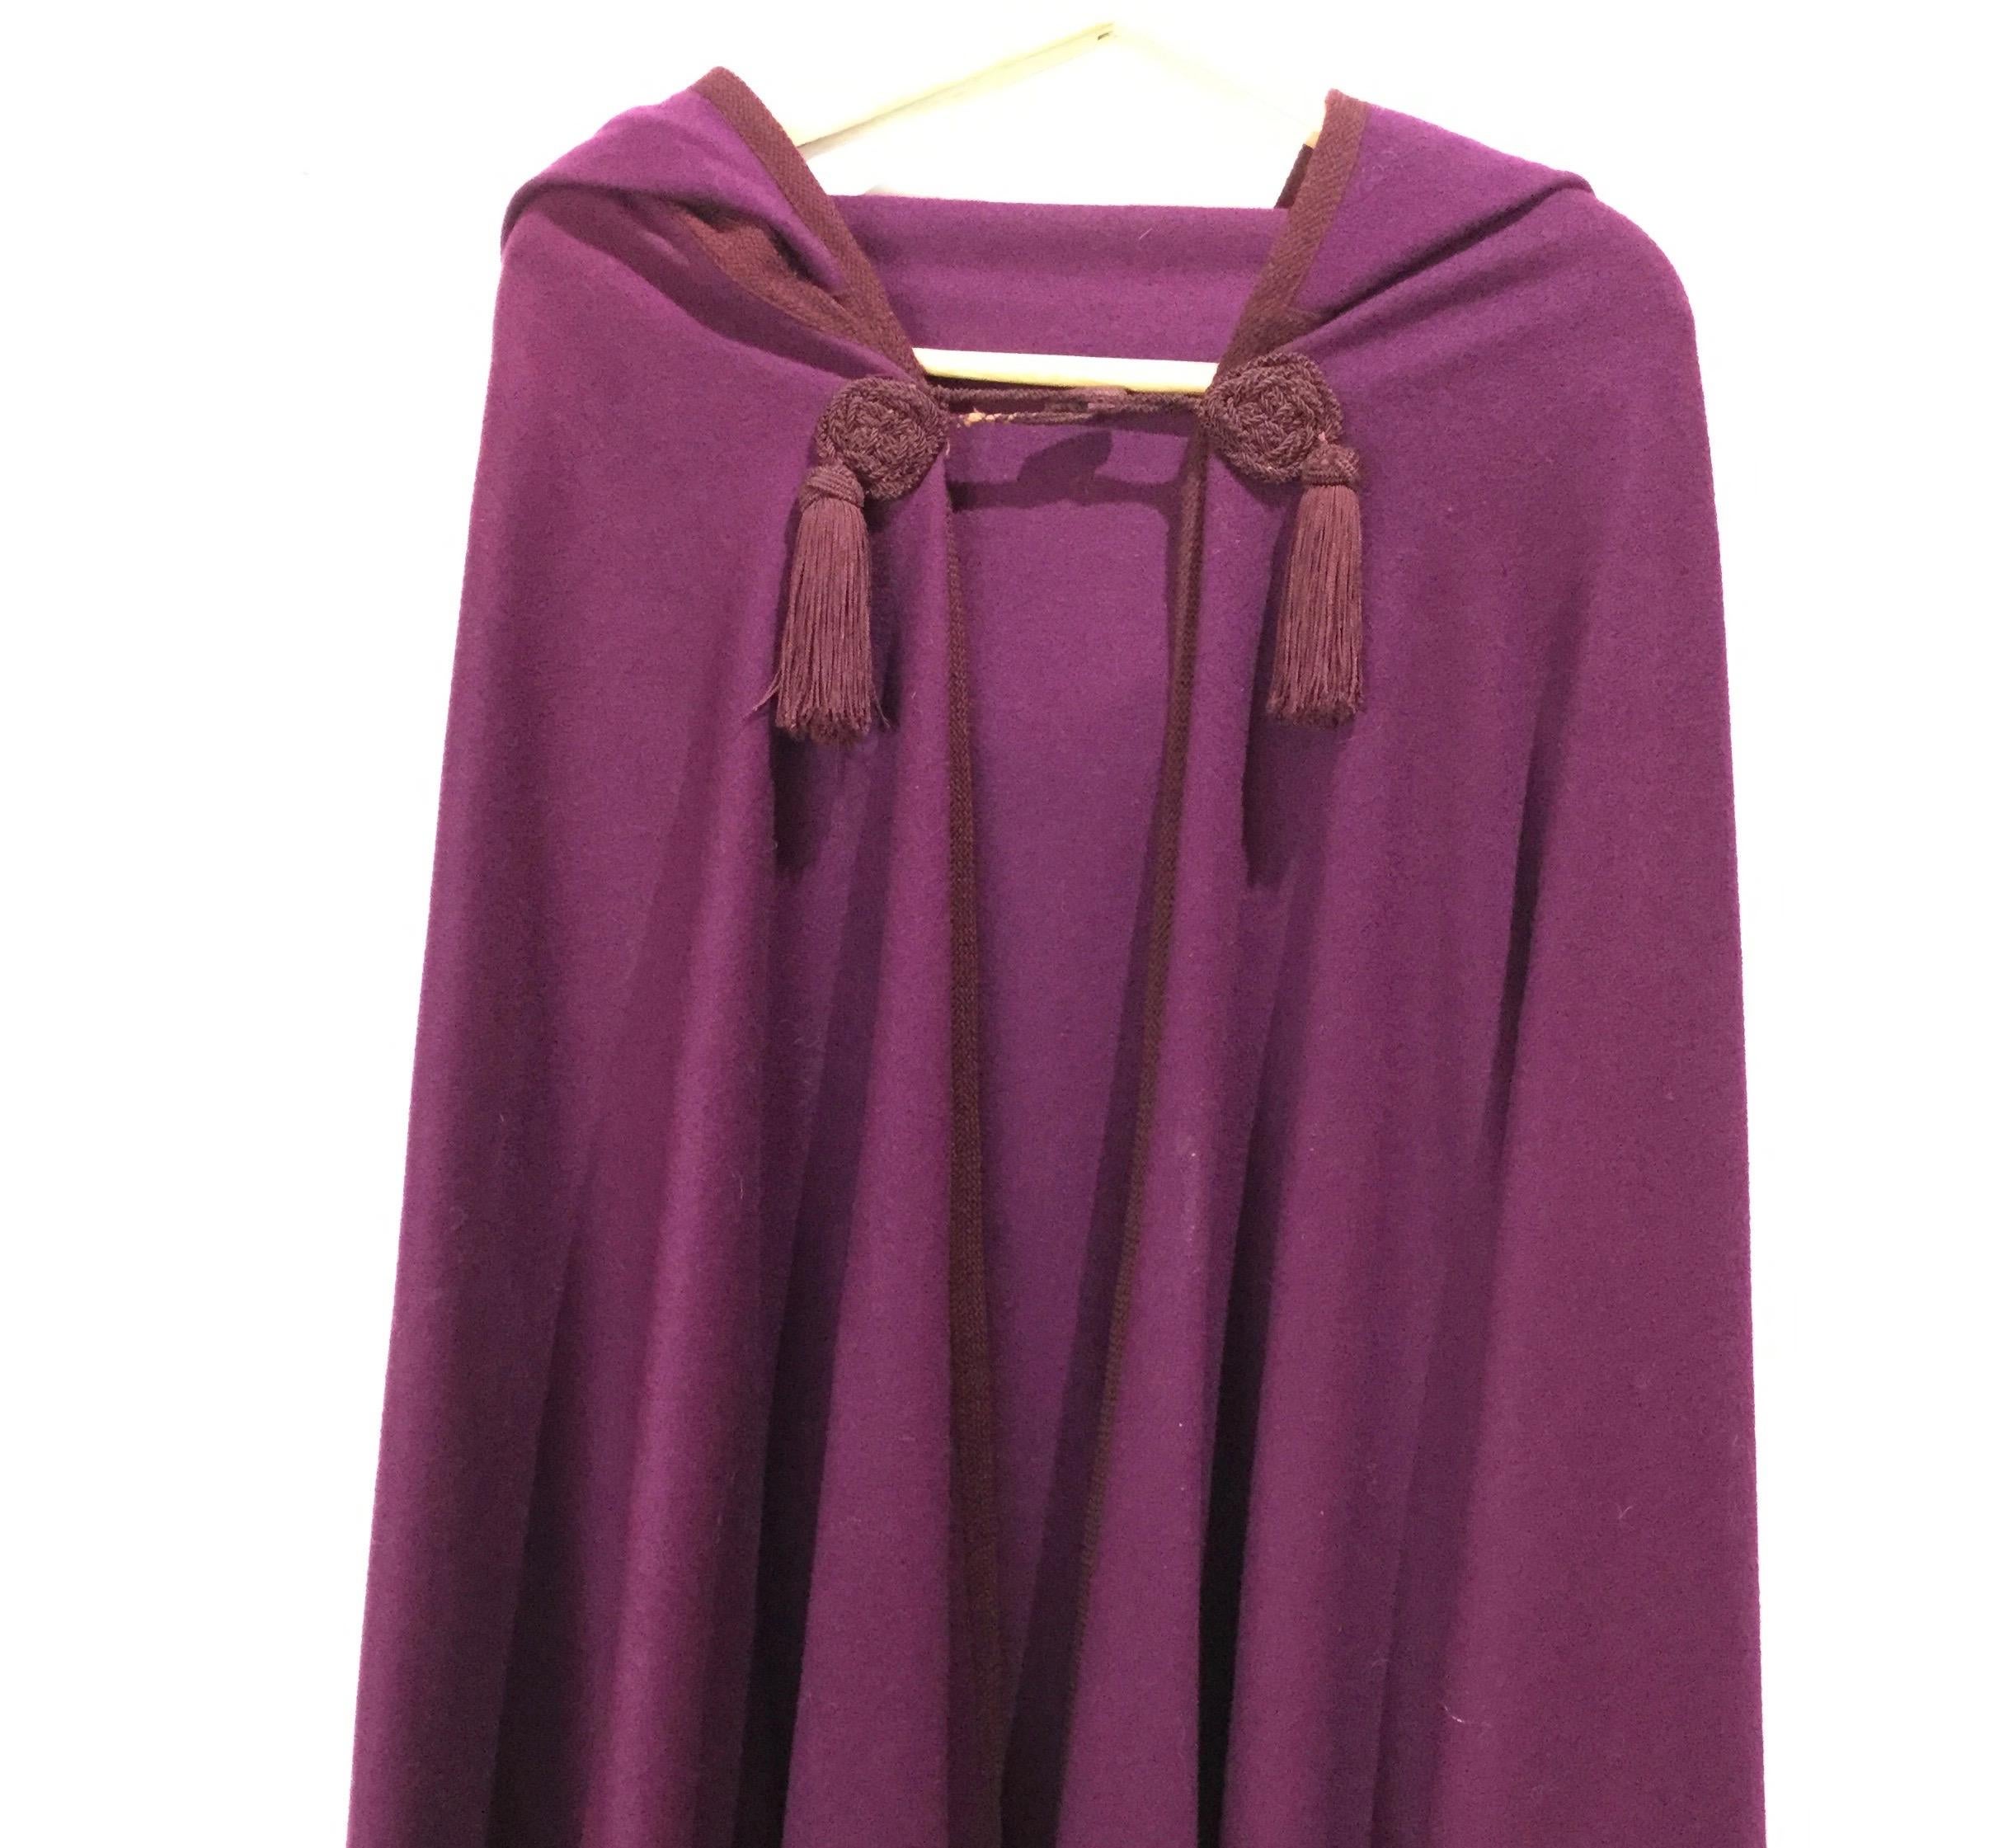 Rare Yves Saint Laurent hooded cape in aubergine / burgundy color from the Russian Collection, 1976.
Yves Saint Laurent was inspired by the Russian Ballet and Opera, Leon Bakst